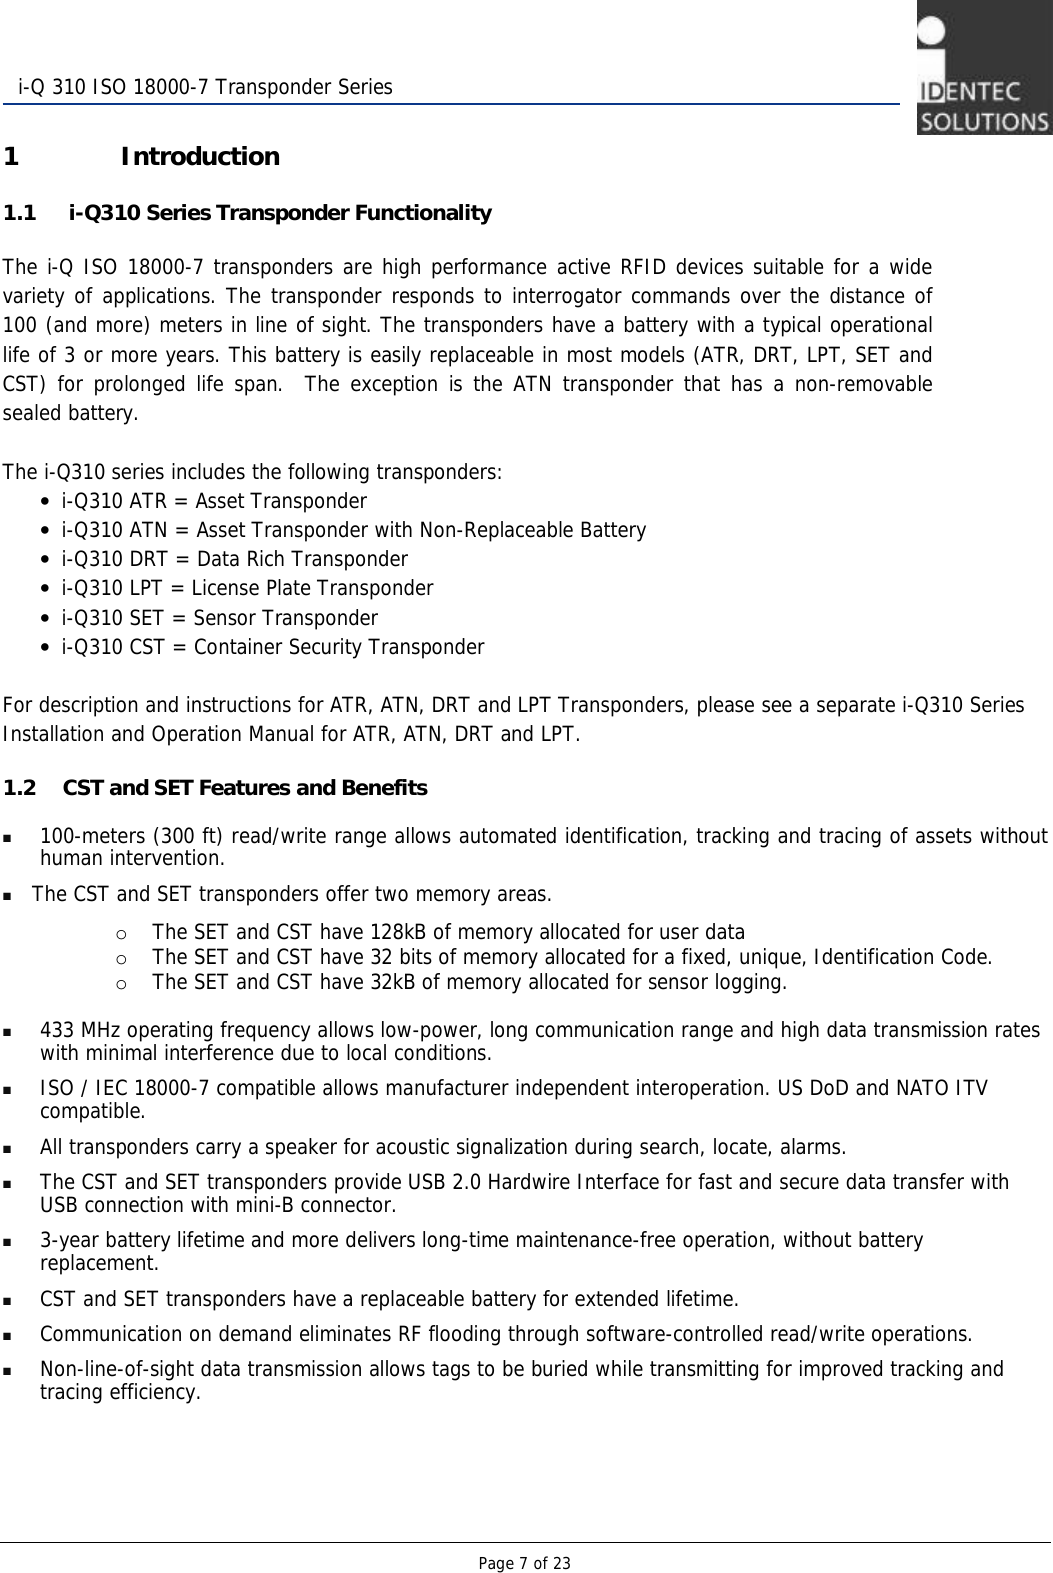   Page 7 of 23  i-Q 310 ISO 18000-7 Transponder Series 1 Introduction 1.1  i-Q310 Series Transponder Functionality The i-Q ISO 18000-7 transponders are high performance active RFID devices suitable for a wide variety of applications. The transponder responds to interrogator commands over the distance of 100 (and more) meters in line of sight. The transponders have a battery with a typical operational life of 3 or more years. This battery is easily replaceable in most models (ATR, DRT, LPT, SET and CST) for prolonged life span.  The exception is the ATN transponder that has a non-removable sealed battery.    The i-Q310 series includes the following transponders: • i-Q310 ATR = Asset Transponder  • i-Q310 ATN = Asset Transponder with Non-Replaceable Battery • i-Q310 DRT = Data Rich Transponder • i-Q310 LPT = License Plate Transponder • i-Q310 SET = Sensor Transponder  • i-Q310 CST = Container Security Transponder  For description and instructions for ATR, ATN, DRT and LPT Transponders, please see a separate i-Q310 Series Installation and Operation Manual for ATR, ATN, DRT and LPT. 1.2 CST and SET Features and Benefits  100-meters (300 ft) read/write range allows automated identification, tracking and tracing of assets without human intervention.  The CST and SET transponders offer two memory areas.   o The SET and CST have 128kB of memory allocated for user data o The SET and CST have 32 bits of memory allocated for a fixed, unique, Identification Code.  o The SET and CST have 32kB of memory allocated for sensor logging.   433 MHz operating frequency allows low-power, long communication range and high data transmission rates with minimal interference due to local conditions.  ISO / IEC 18000-7 compatible allows manufacturer independent interoperation. US DoD and NATO ITV compatible.    All transponders carry a speaker for acoustic signalization during search, locate, alarms.  The CST and SET transponders provide USB 2.0 Hardwire Interface for fast and secure data transfer with USB connection with mini-B connector.  3-year battery lifetime and more delivers long-time maintenance-free operation, without battery replacement.  CST and SET transponders have a replaceable battery for extended lifetime.  Communication on demand eliminates RF flooding through software-controlled read/write operations.  Non-line-of-sight data transmission allows tags to be buried while transmitting for improved tracking and tracing efficiency.   